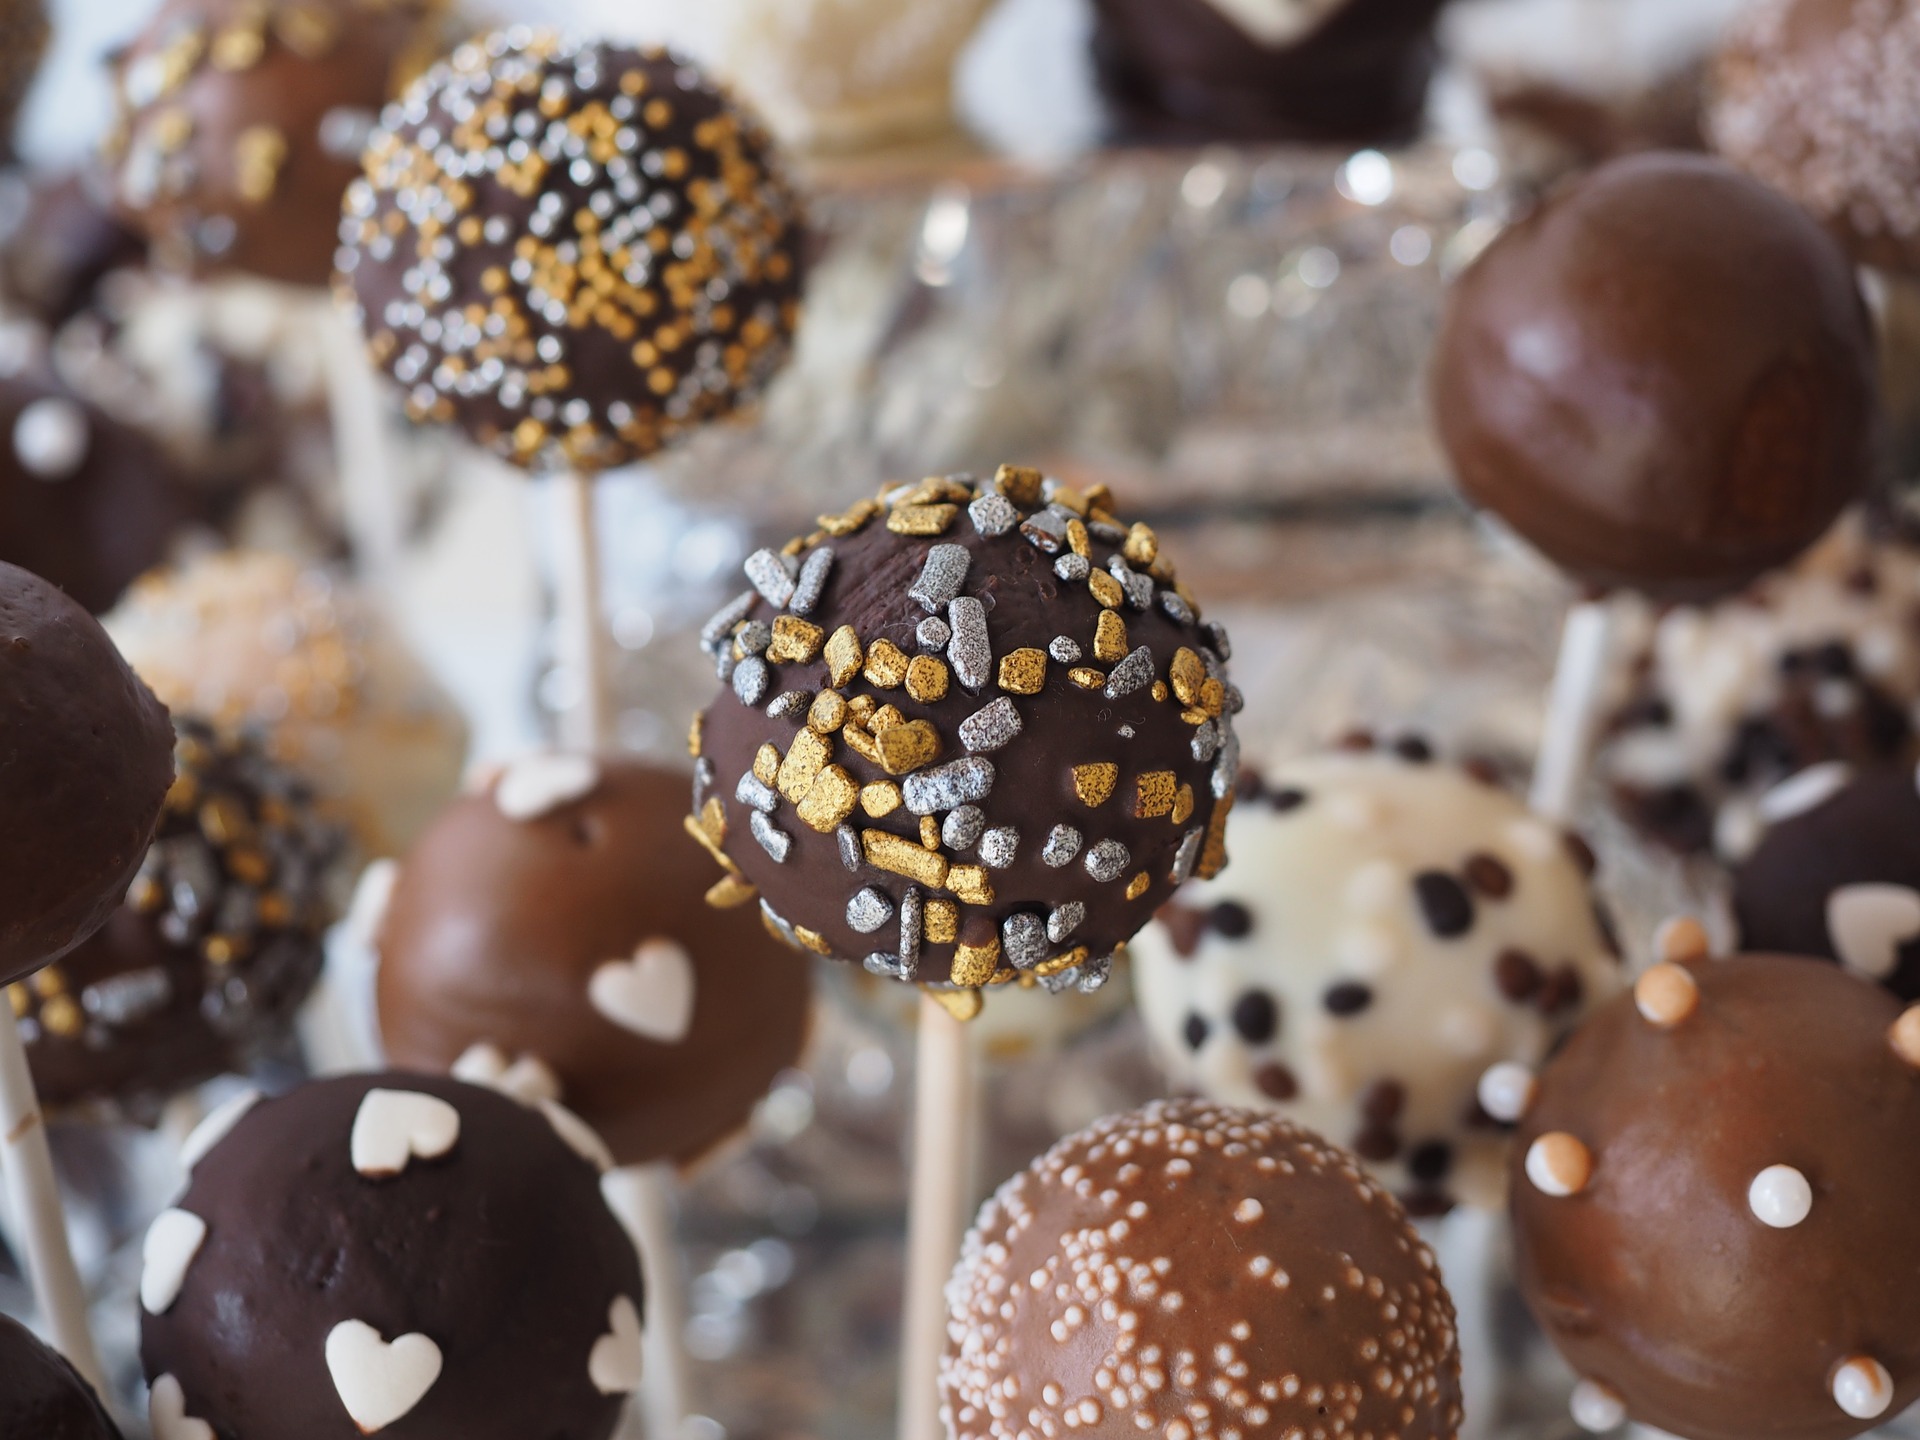 cake pops add to event table decor